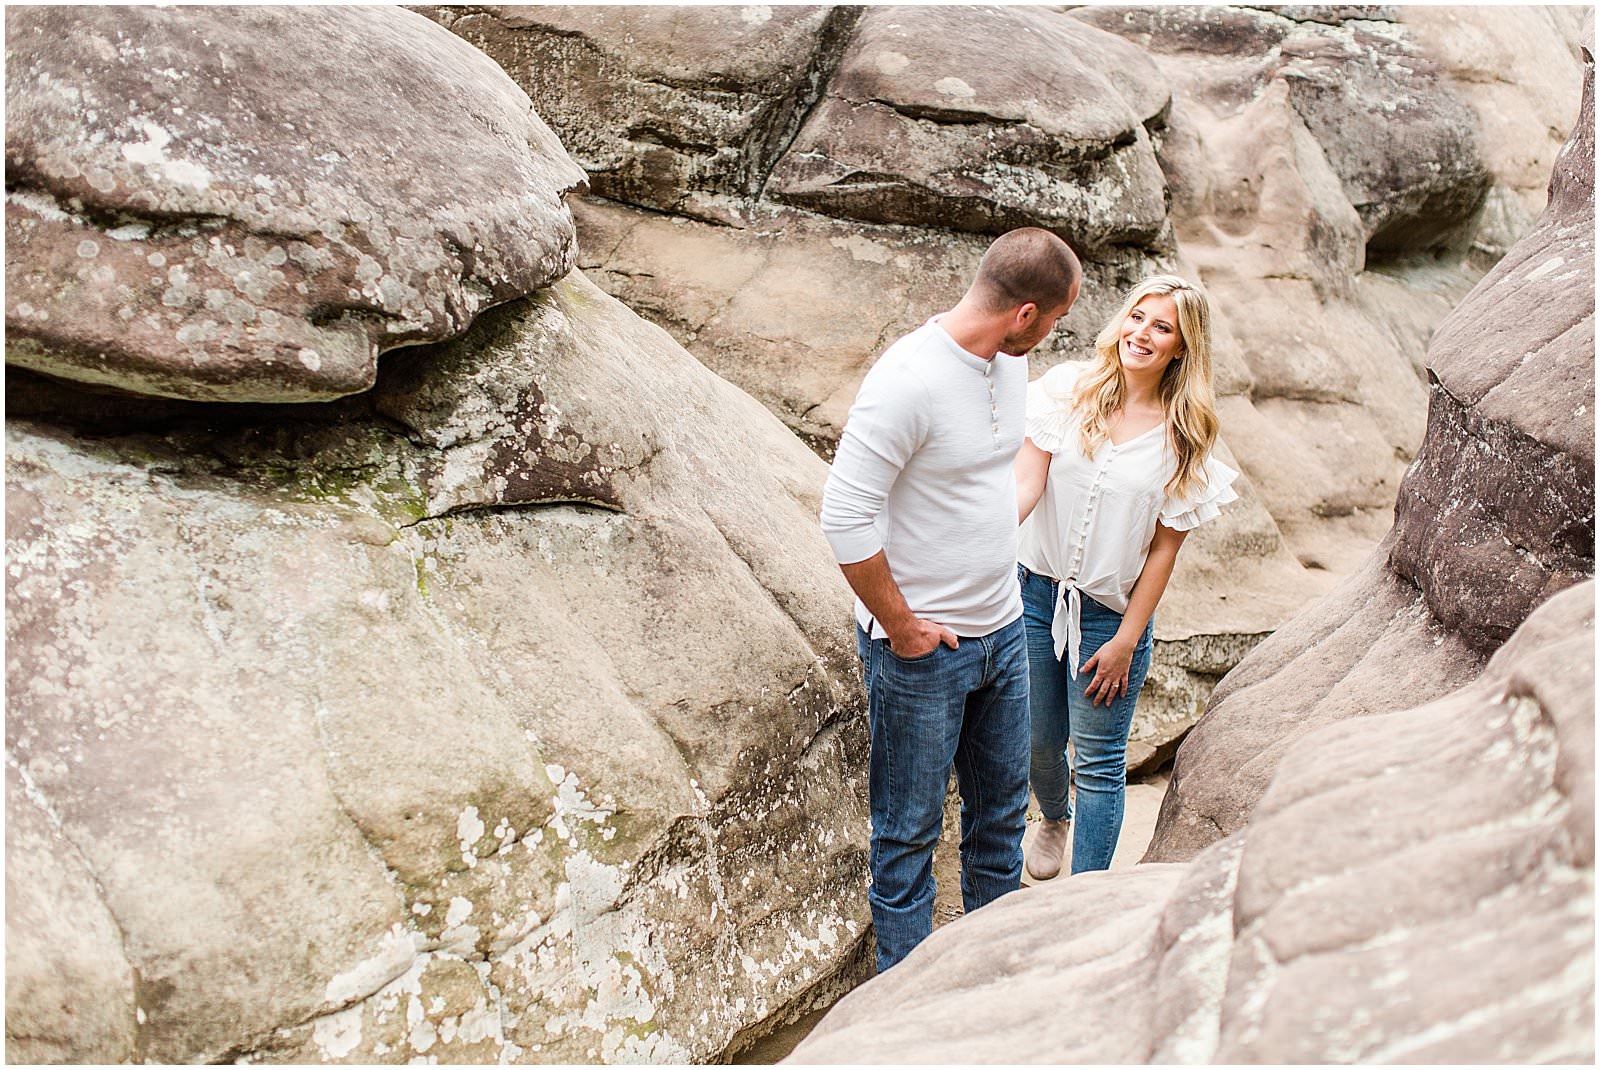 A Garden of the Gods Engagement Session 0017.jpg